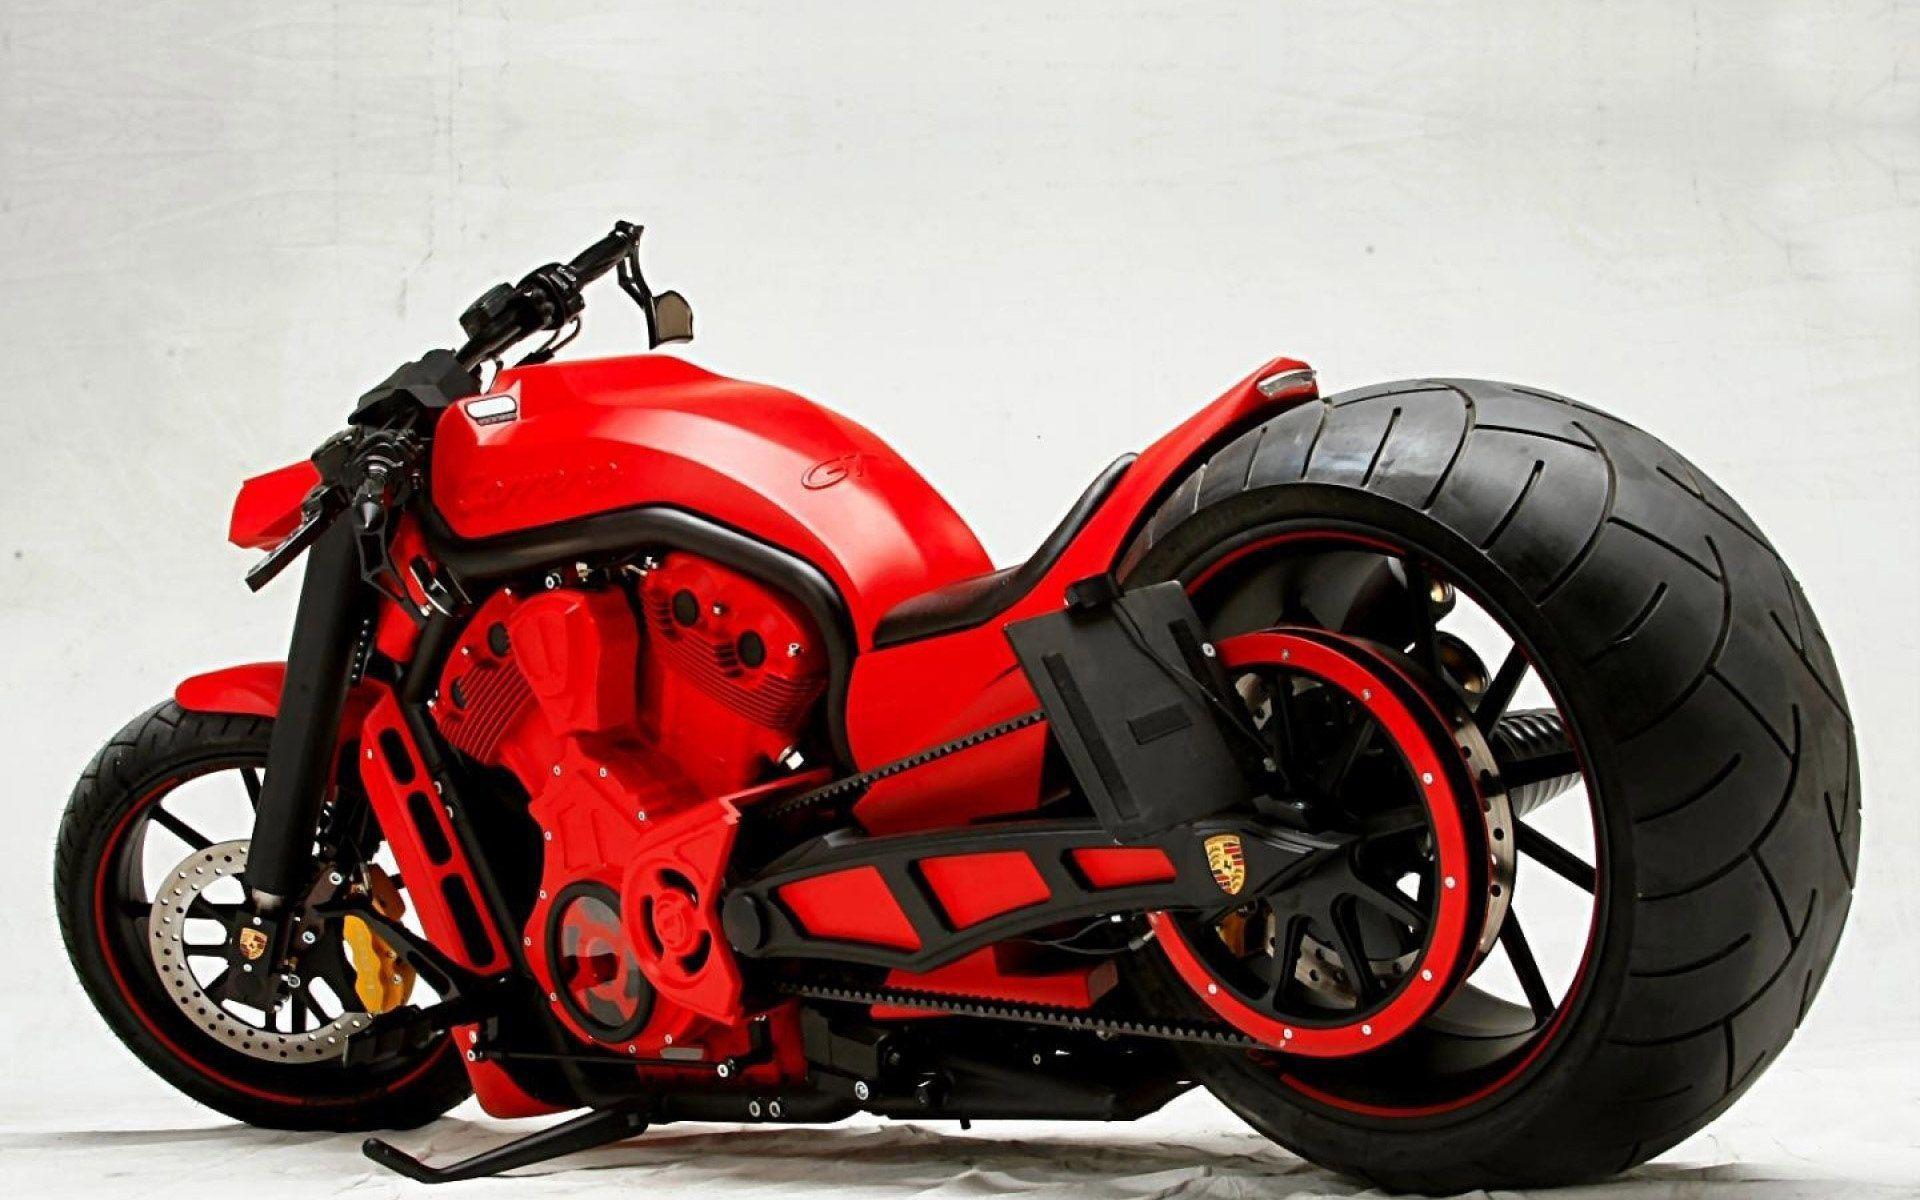 American Choppers High Quality Wallpaper. Ultra HD Motorcycles